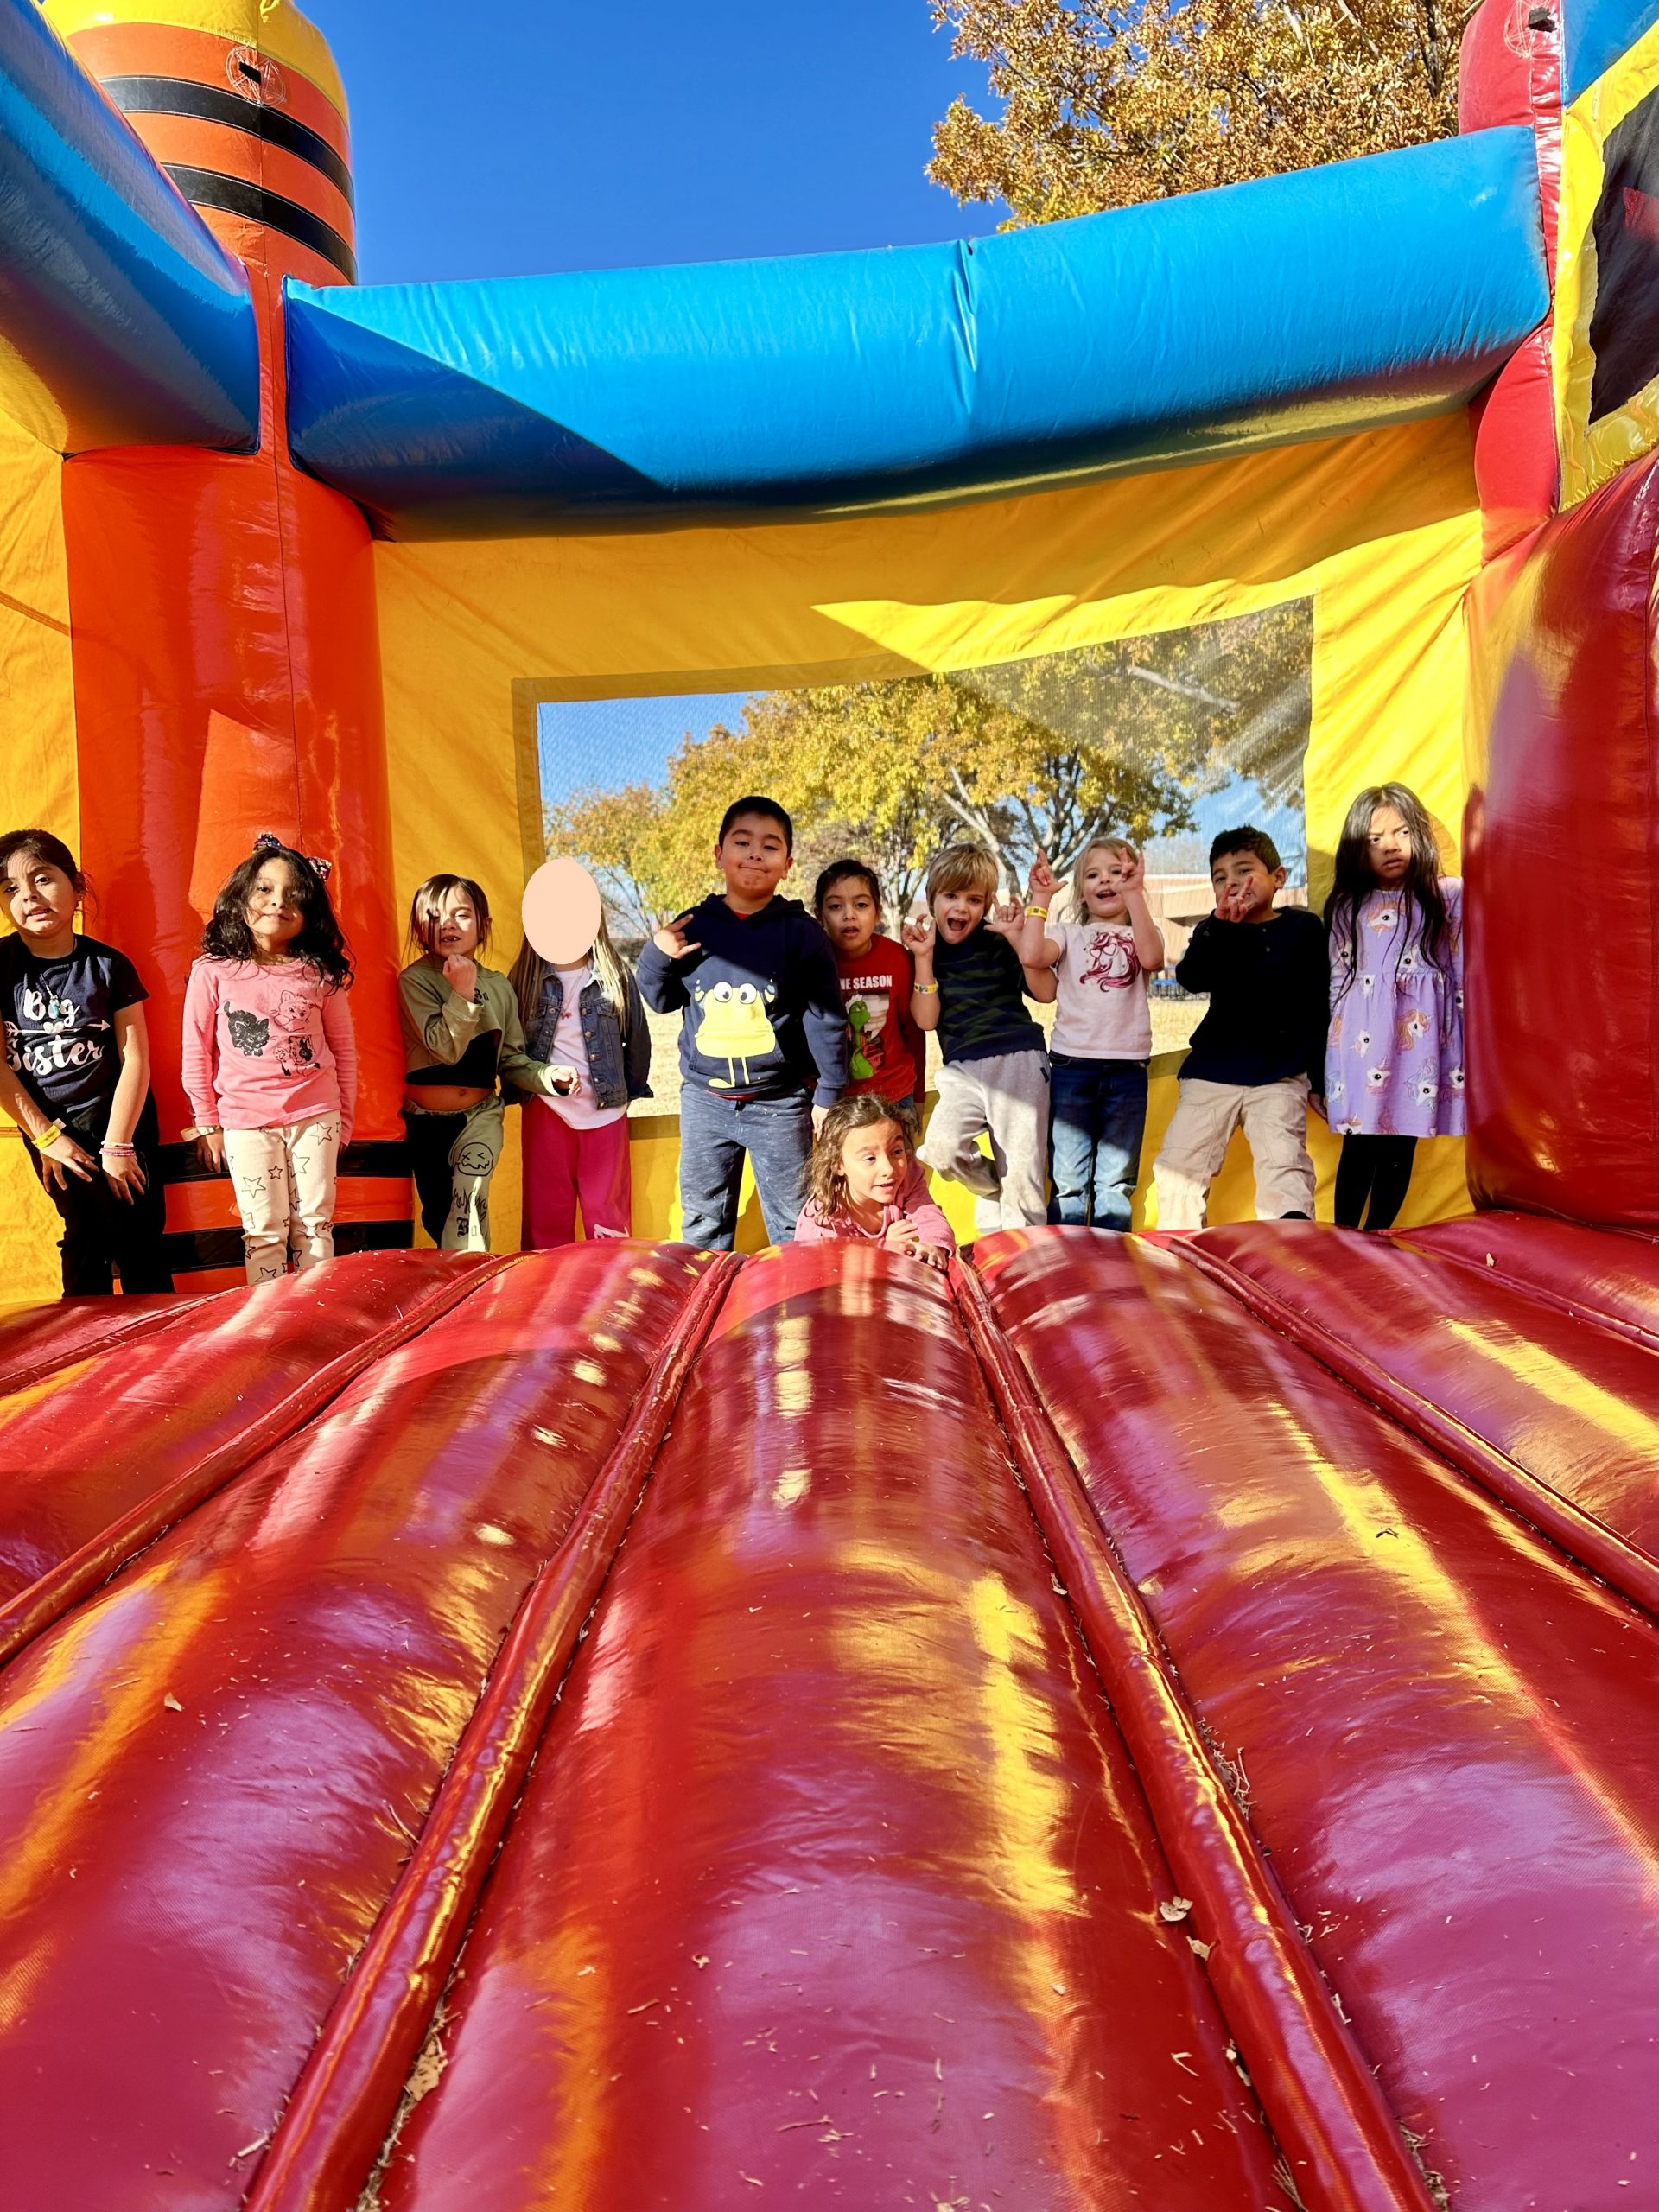 Student's from Mrs. Johnstone's class enjoying the Bounce House